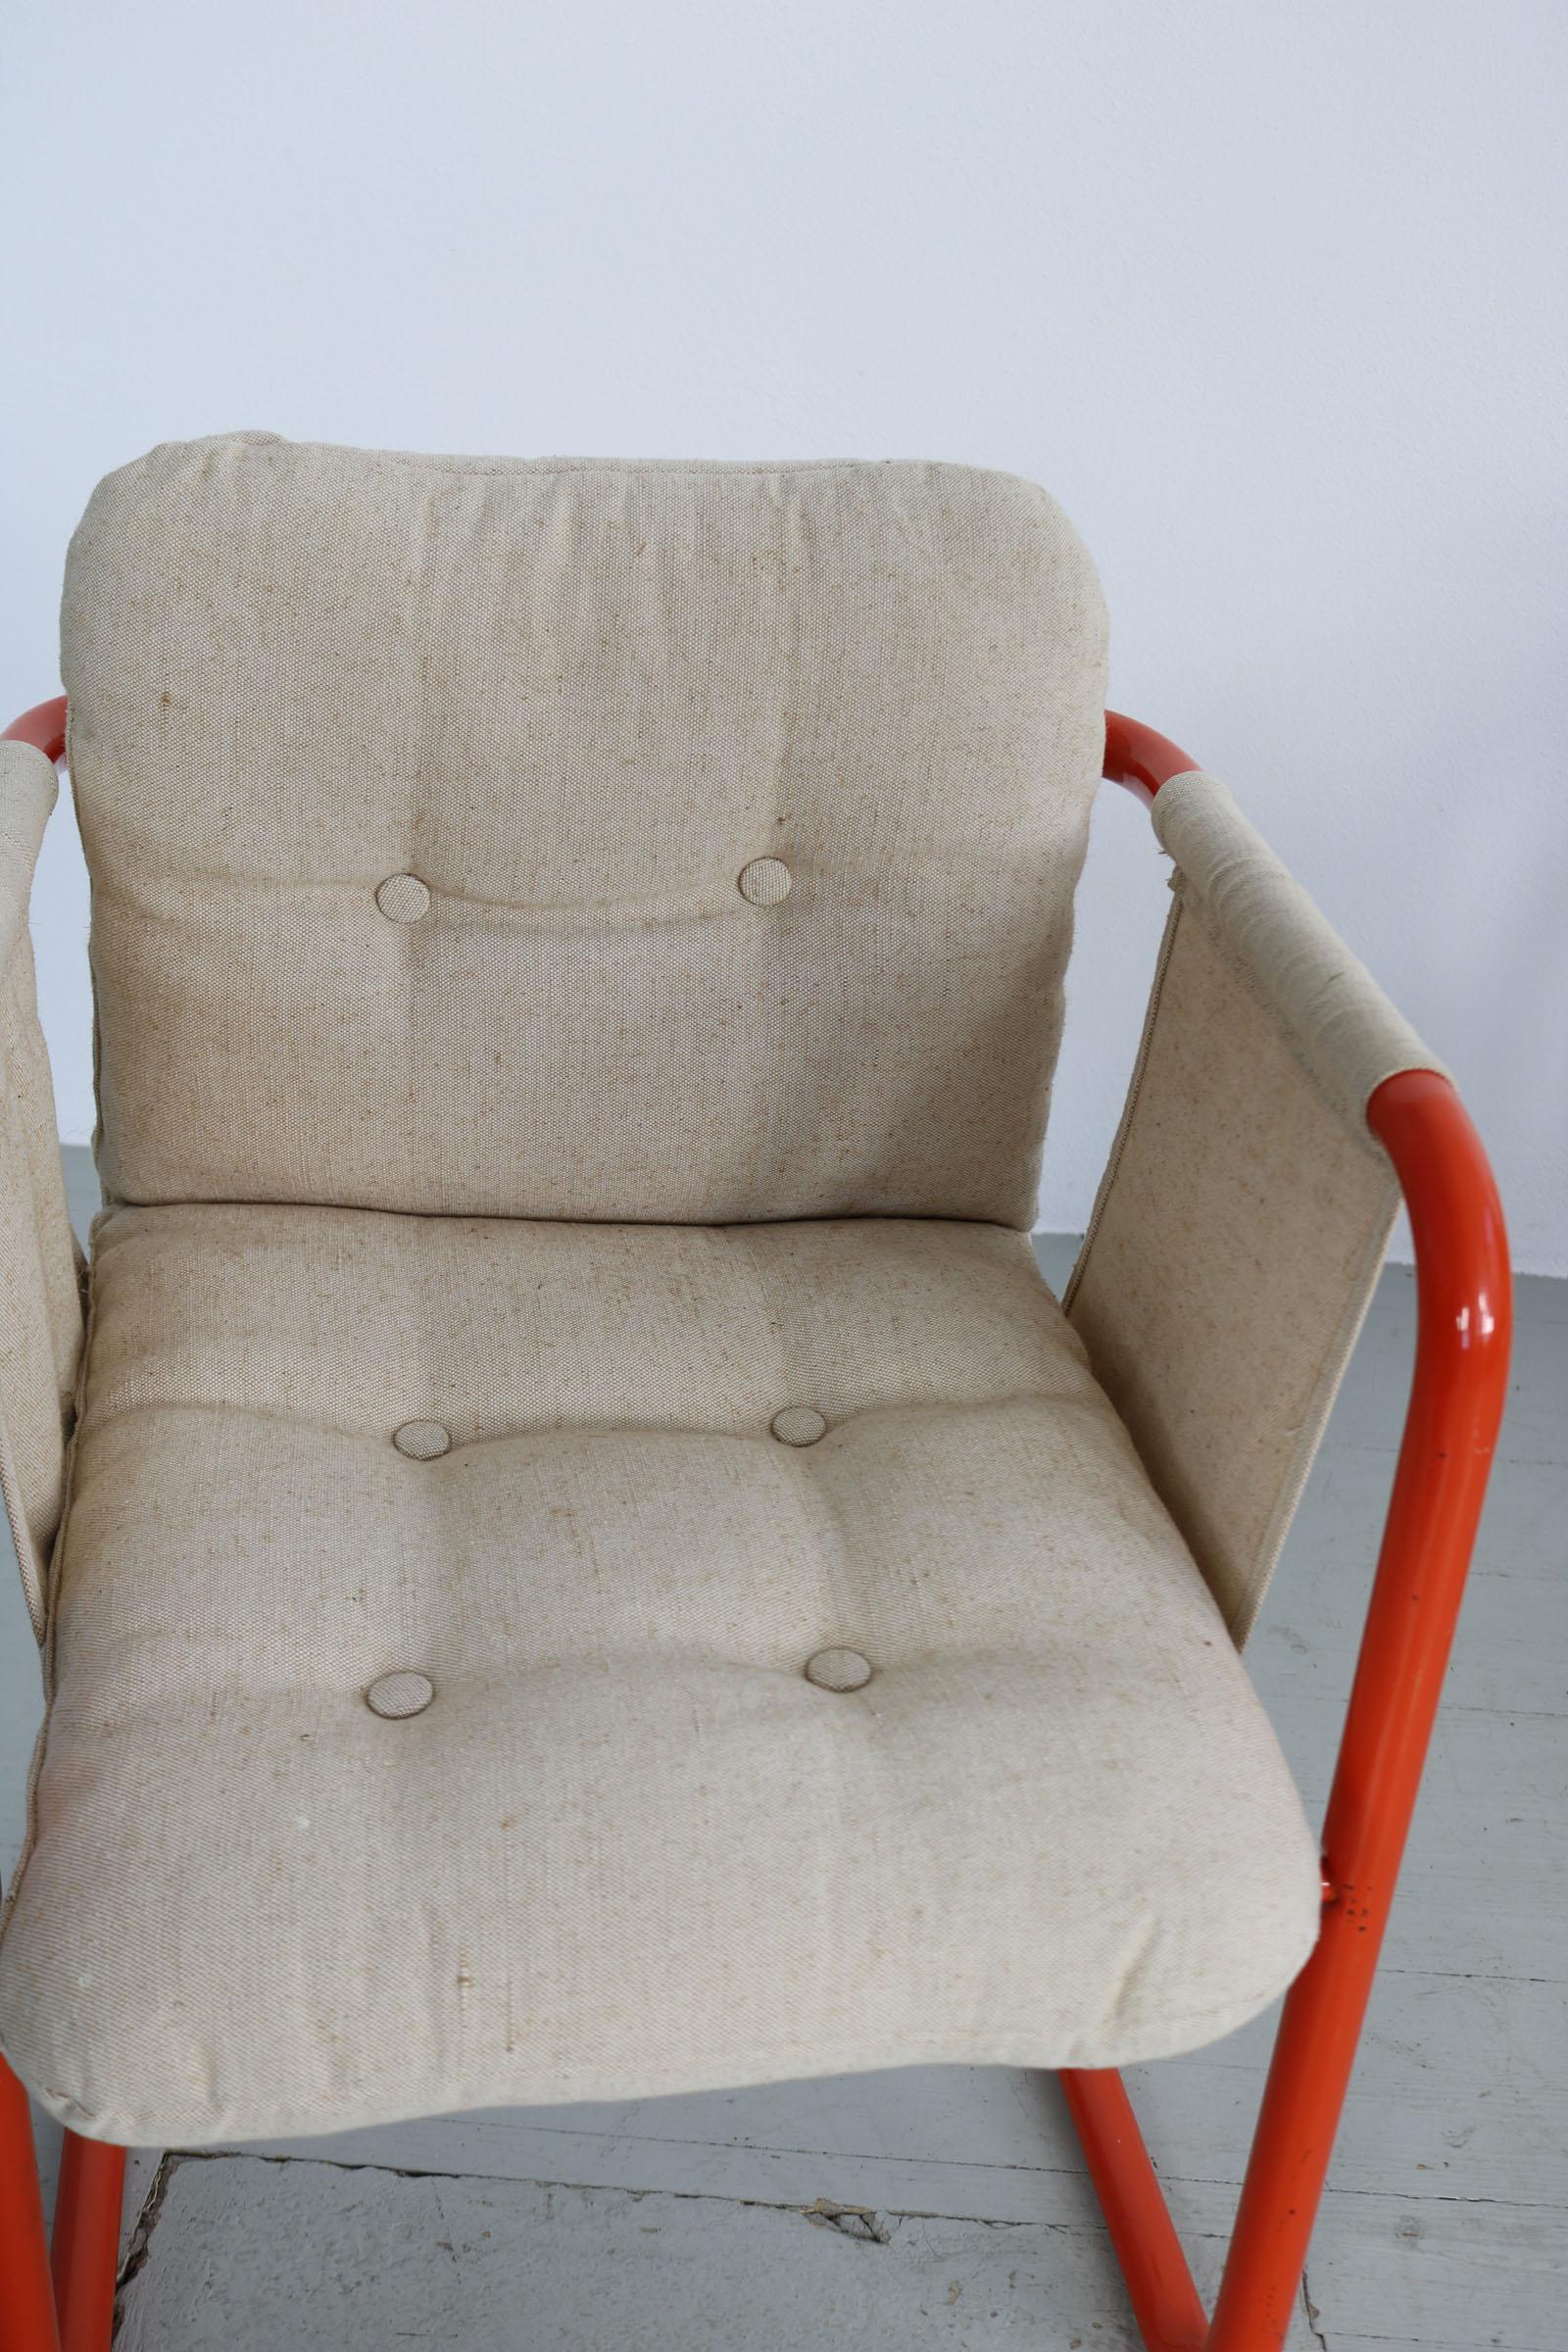 2 Cantilever Armchairs in the Manner of Gae Aulenti, Italy, 1970s For Sale 1